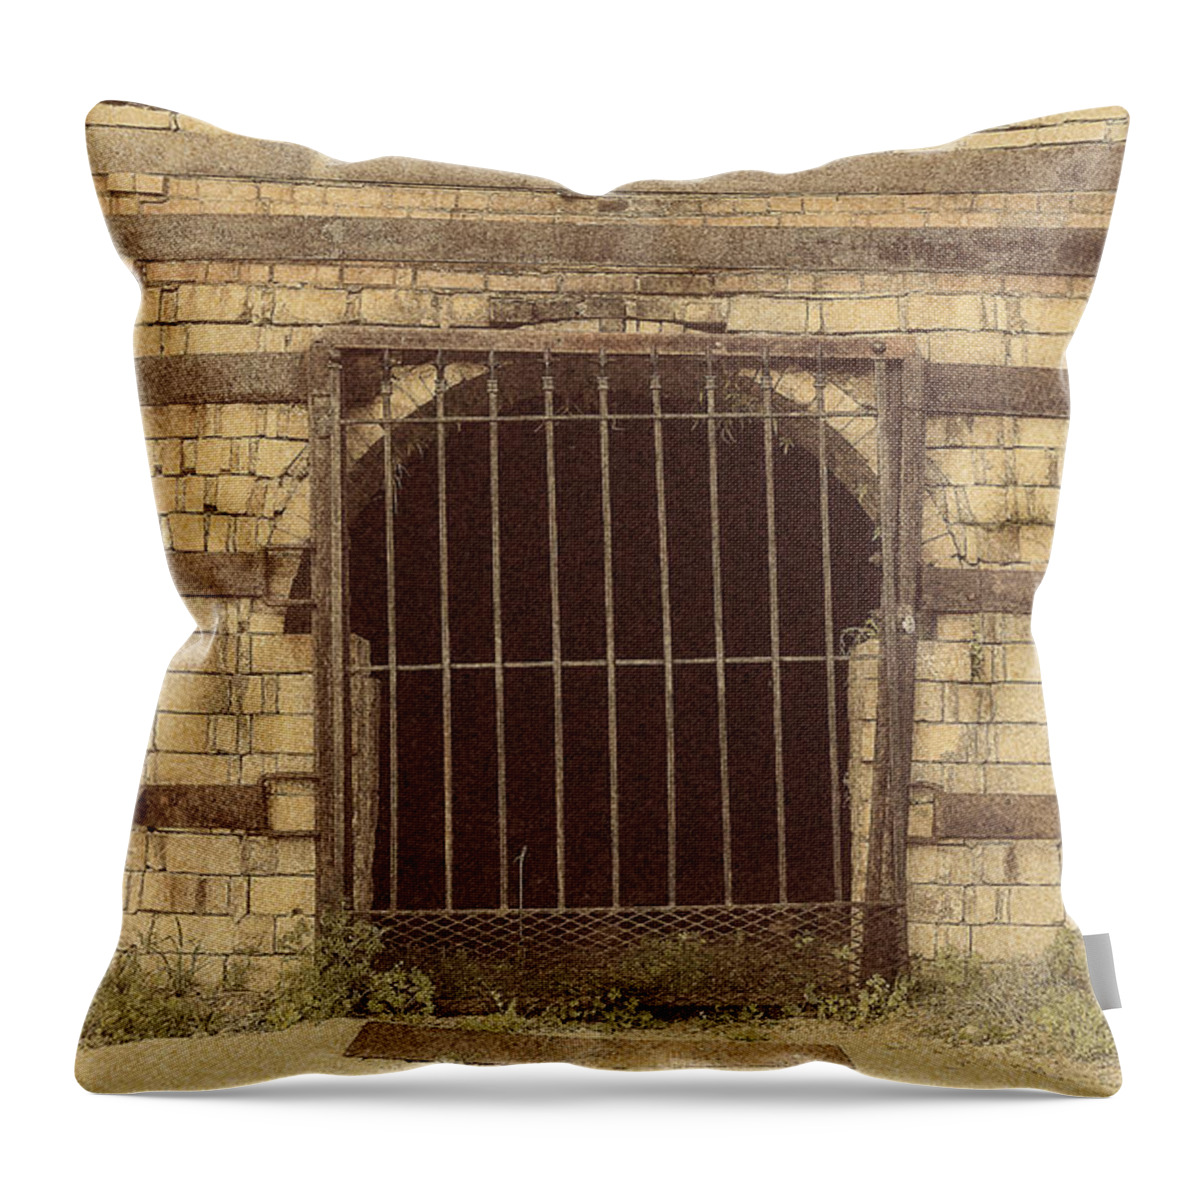 2014 Throw Pillow featuring the photograph Brickworks 34 by Charles Hite